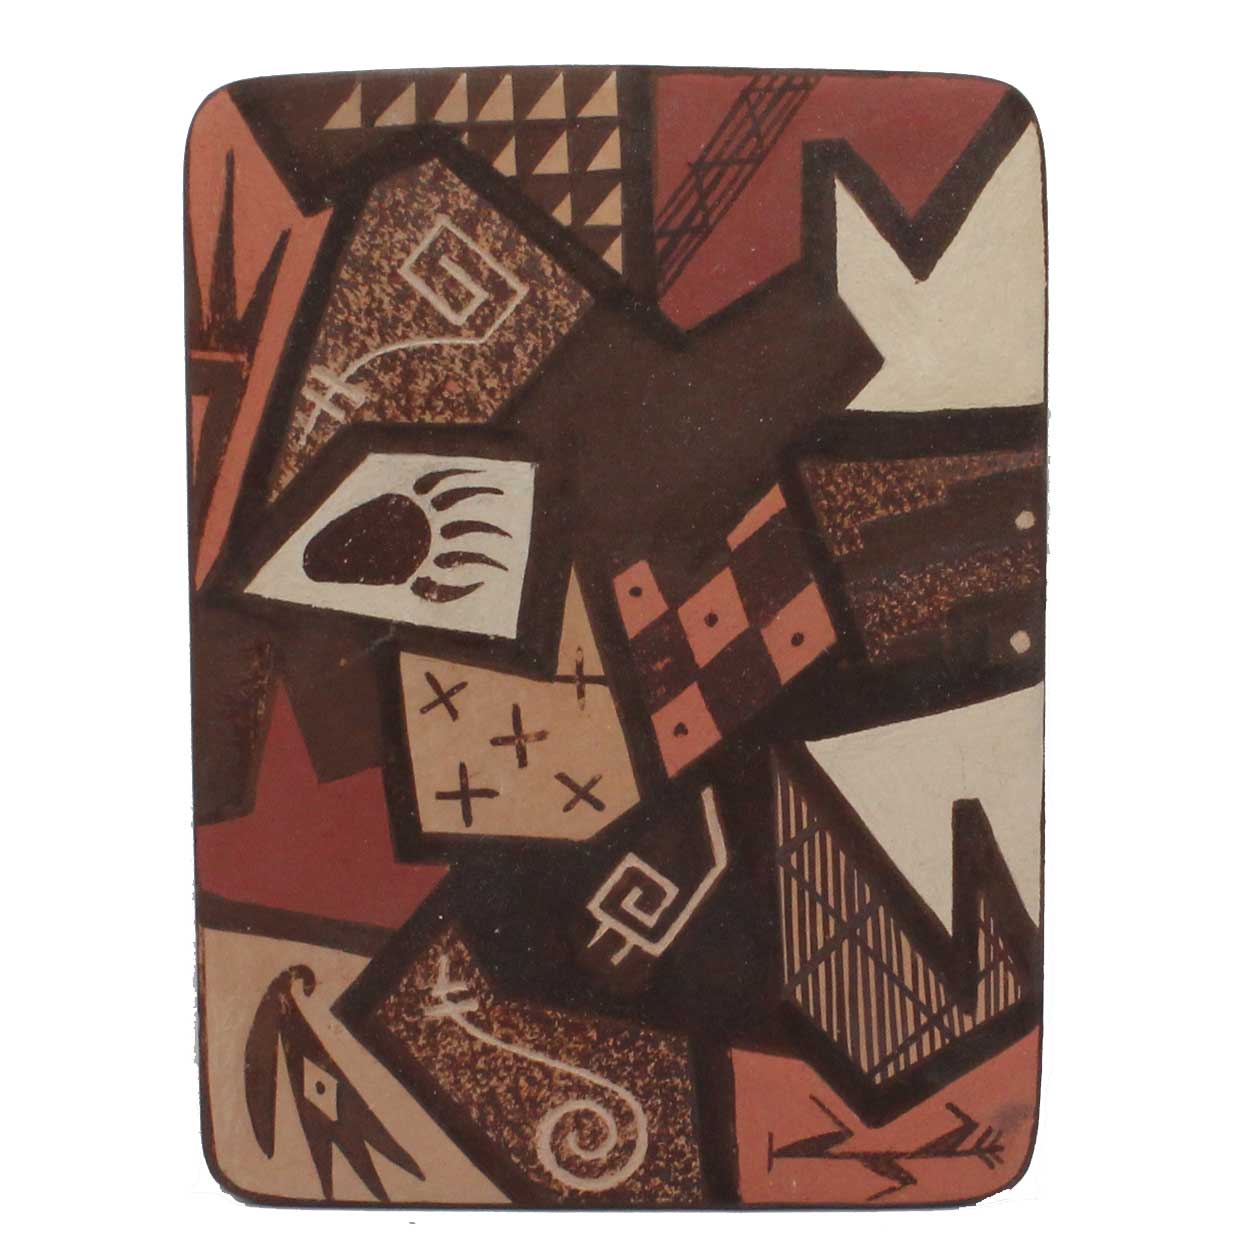 Hopi Clay Pottery Tile by Poleahla